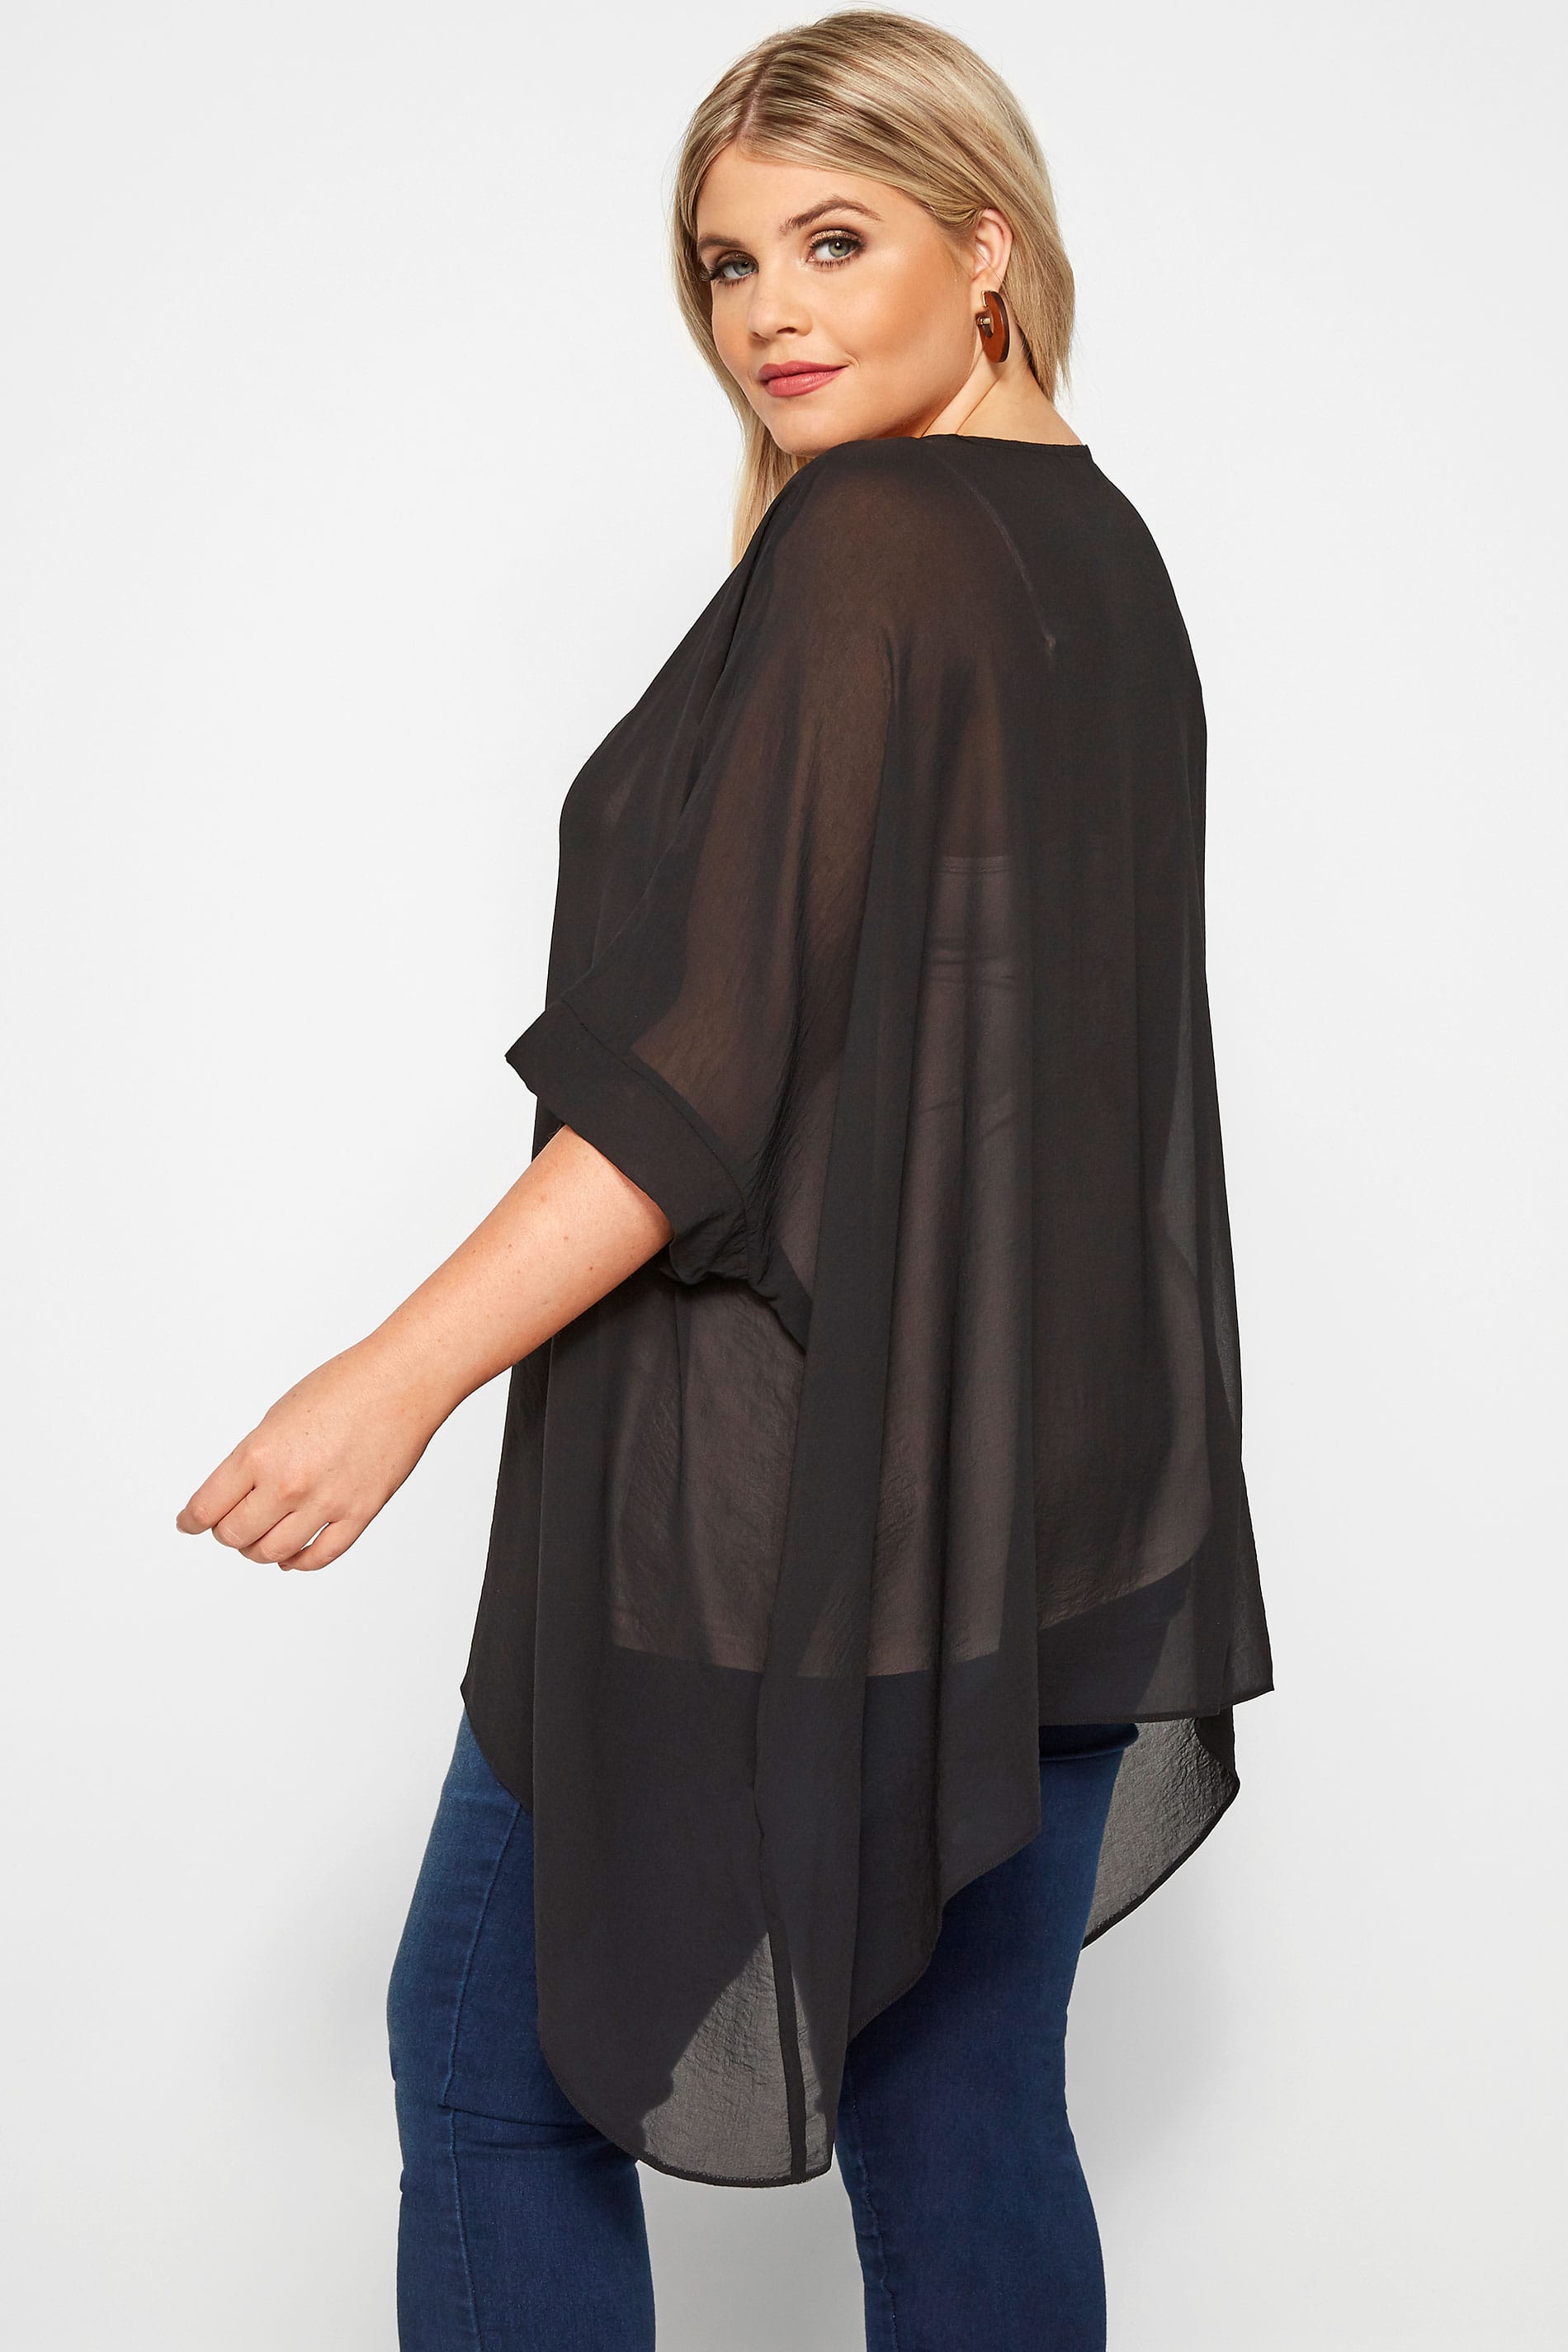 SIZE UP Black Chiffon Cape Top | Sizes 16 to 32 | Yours Clothing